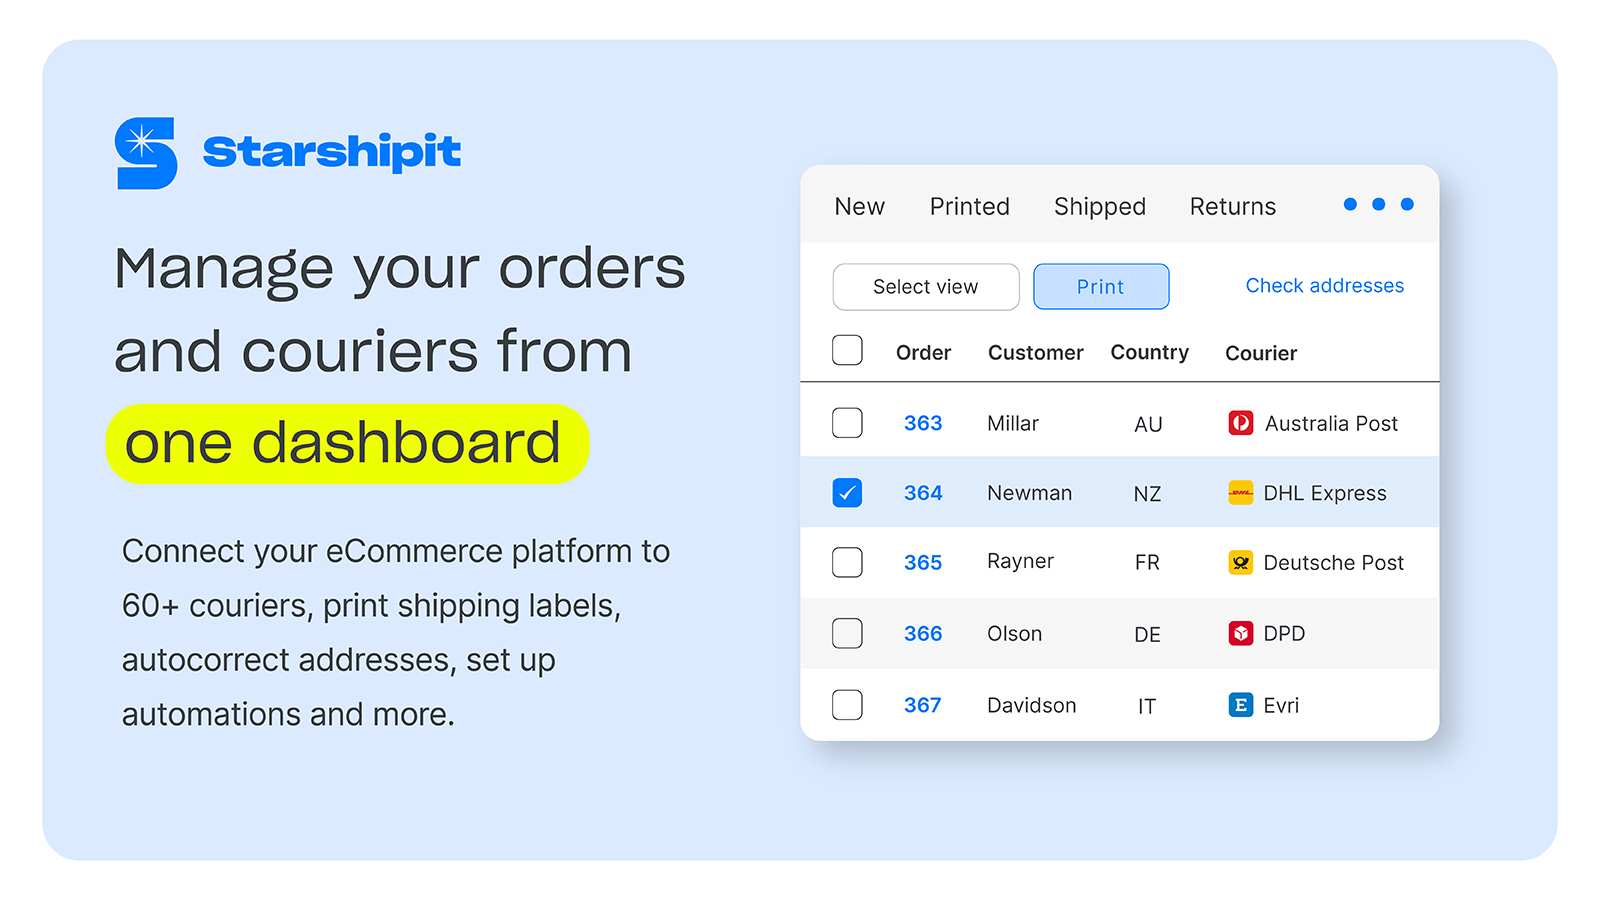 You'll never have too many tabs open again - manage all orders and couriers from one single dashboard during fulfilment!